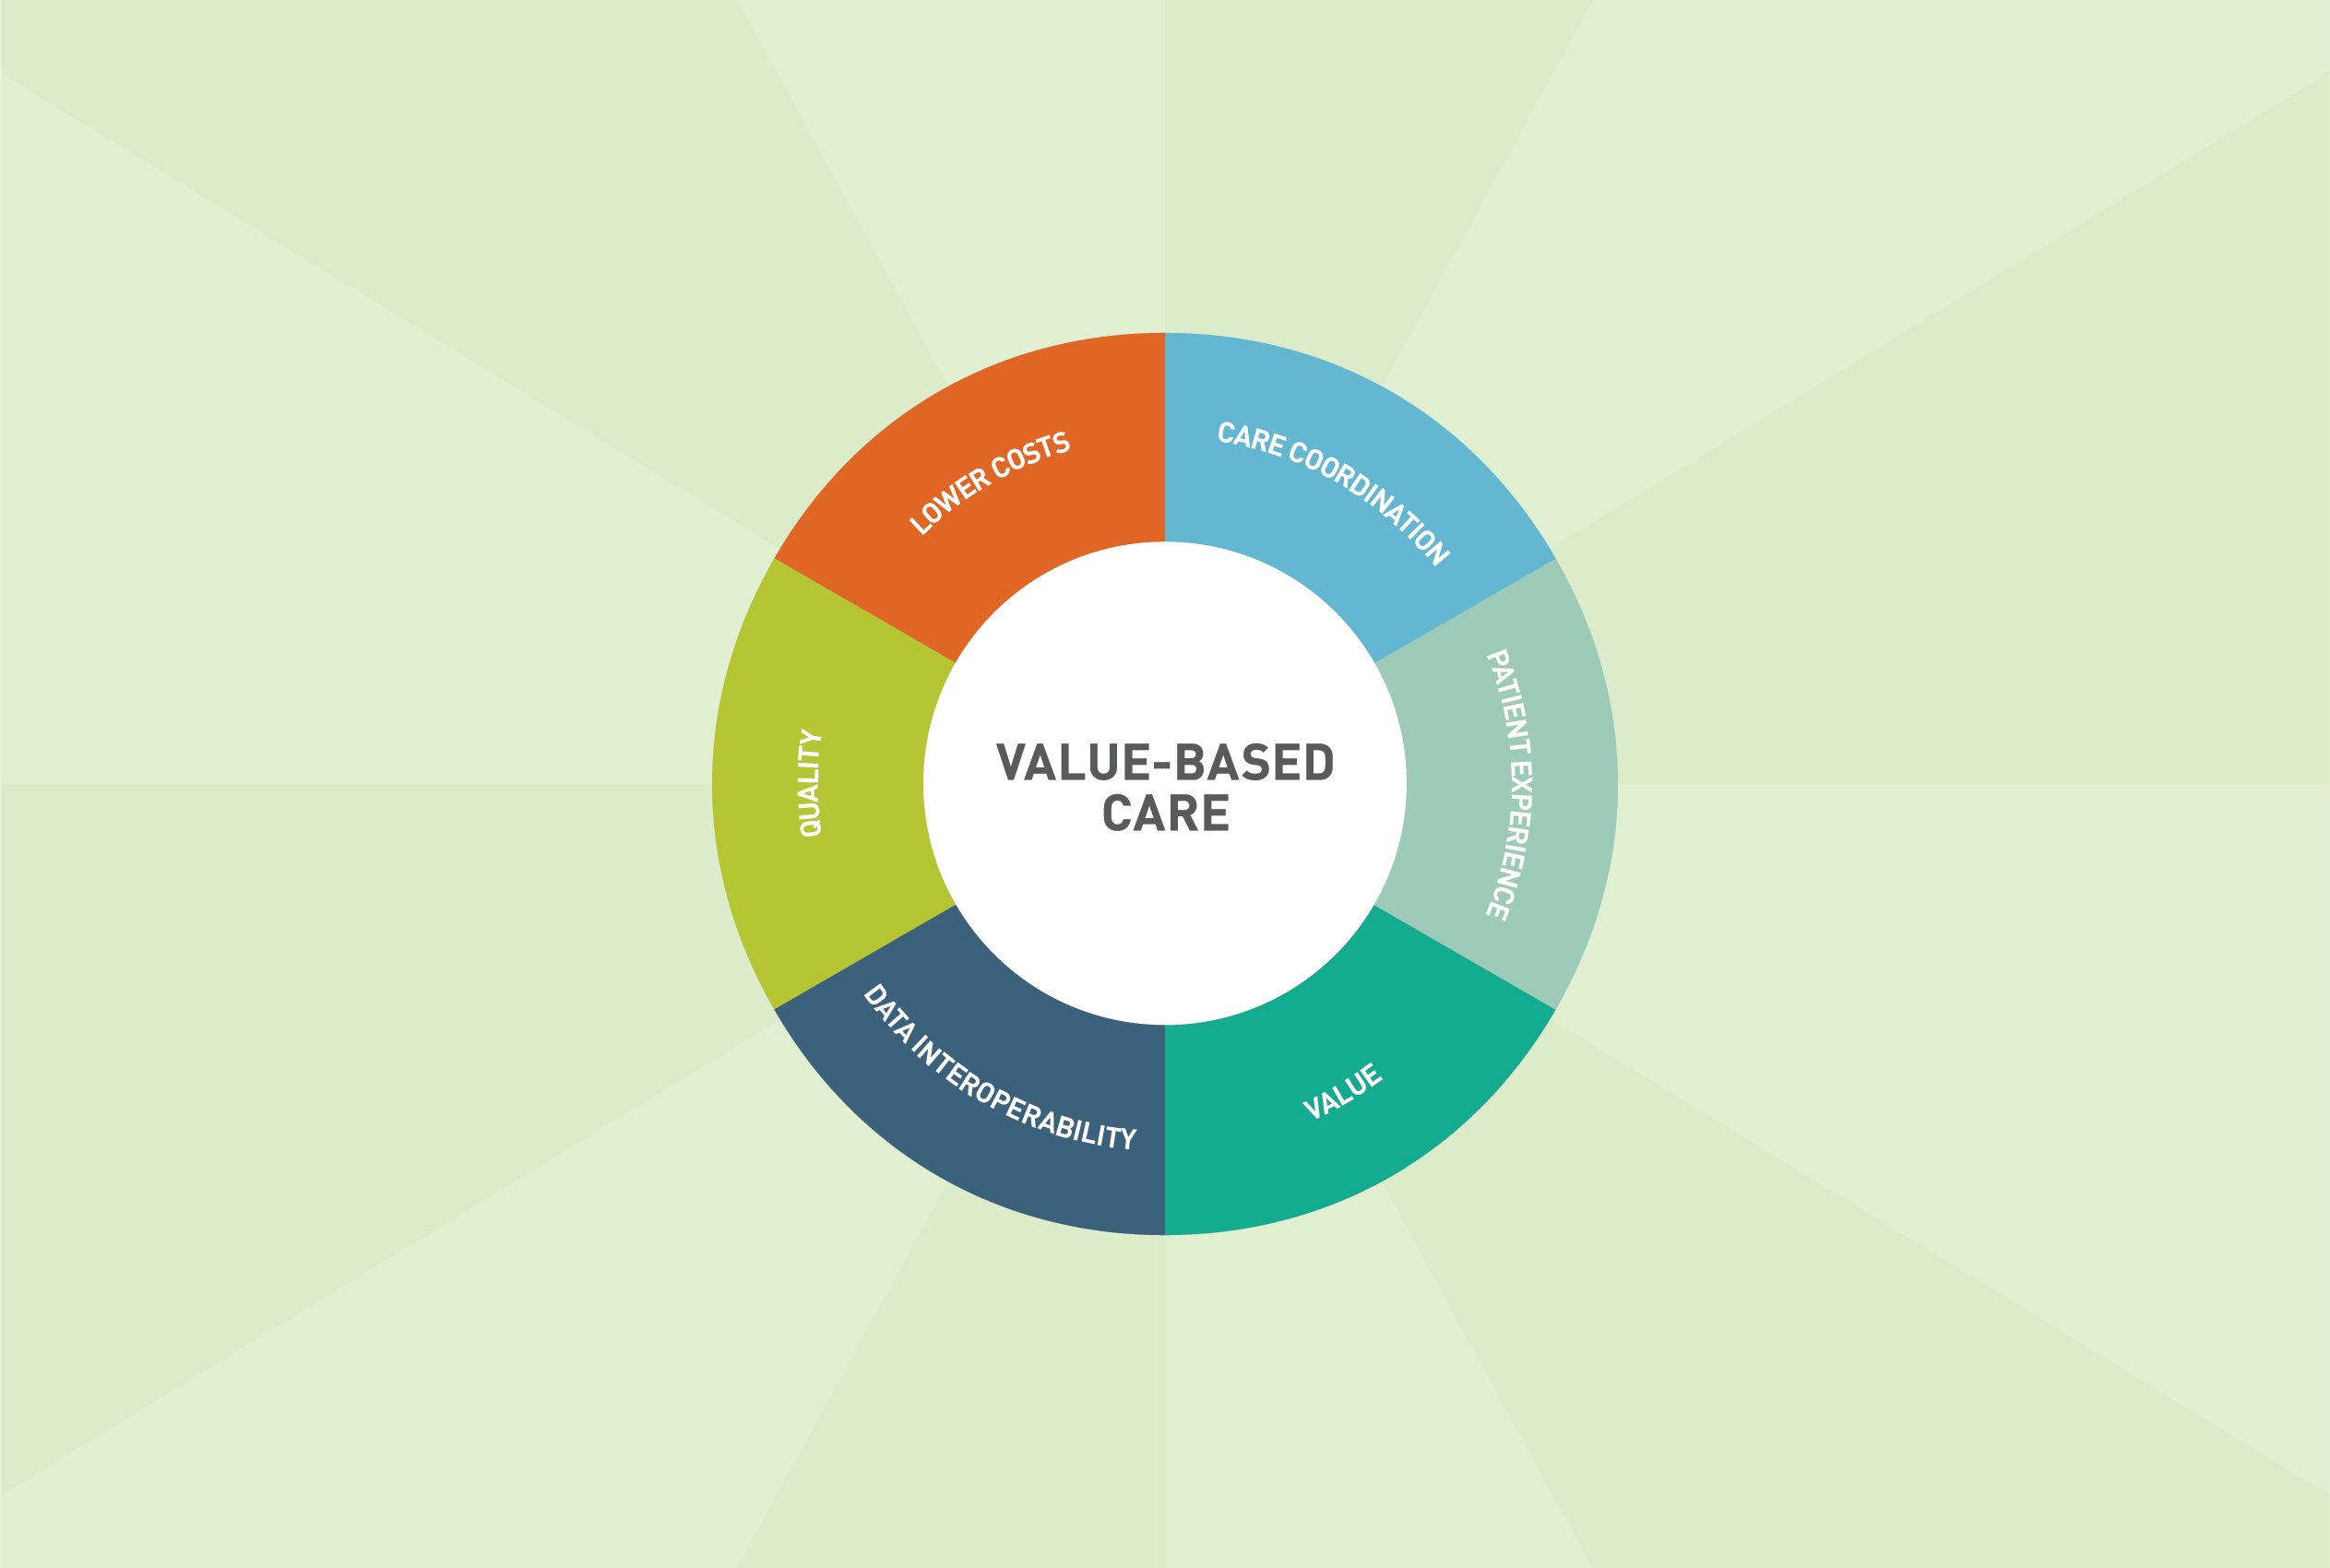 Health Plans Must Support, And Benefit From, Value-Based Care